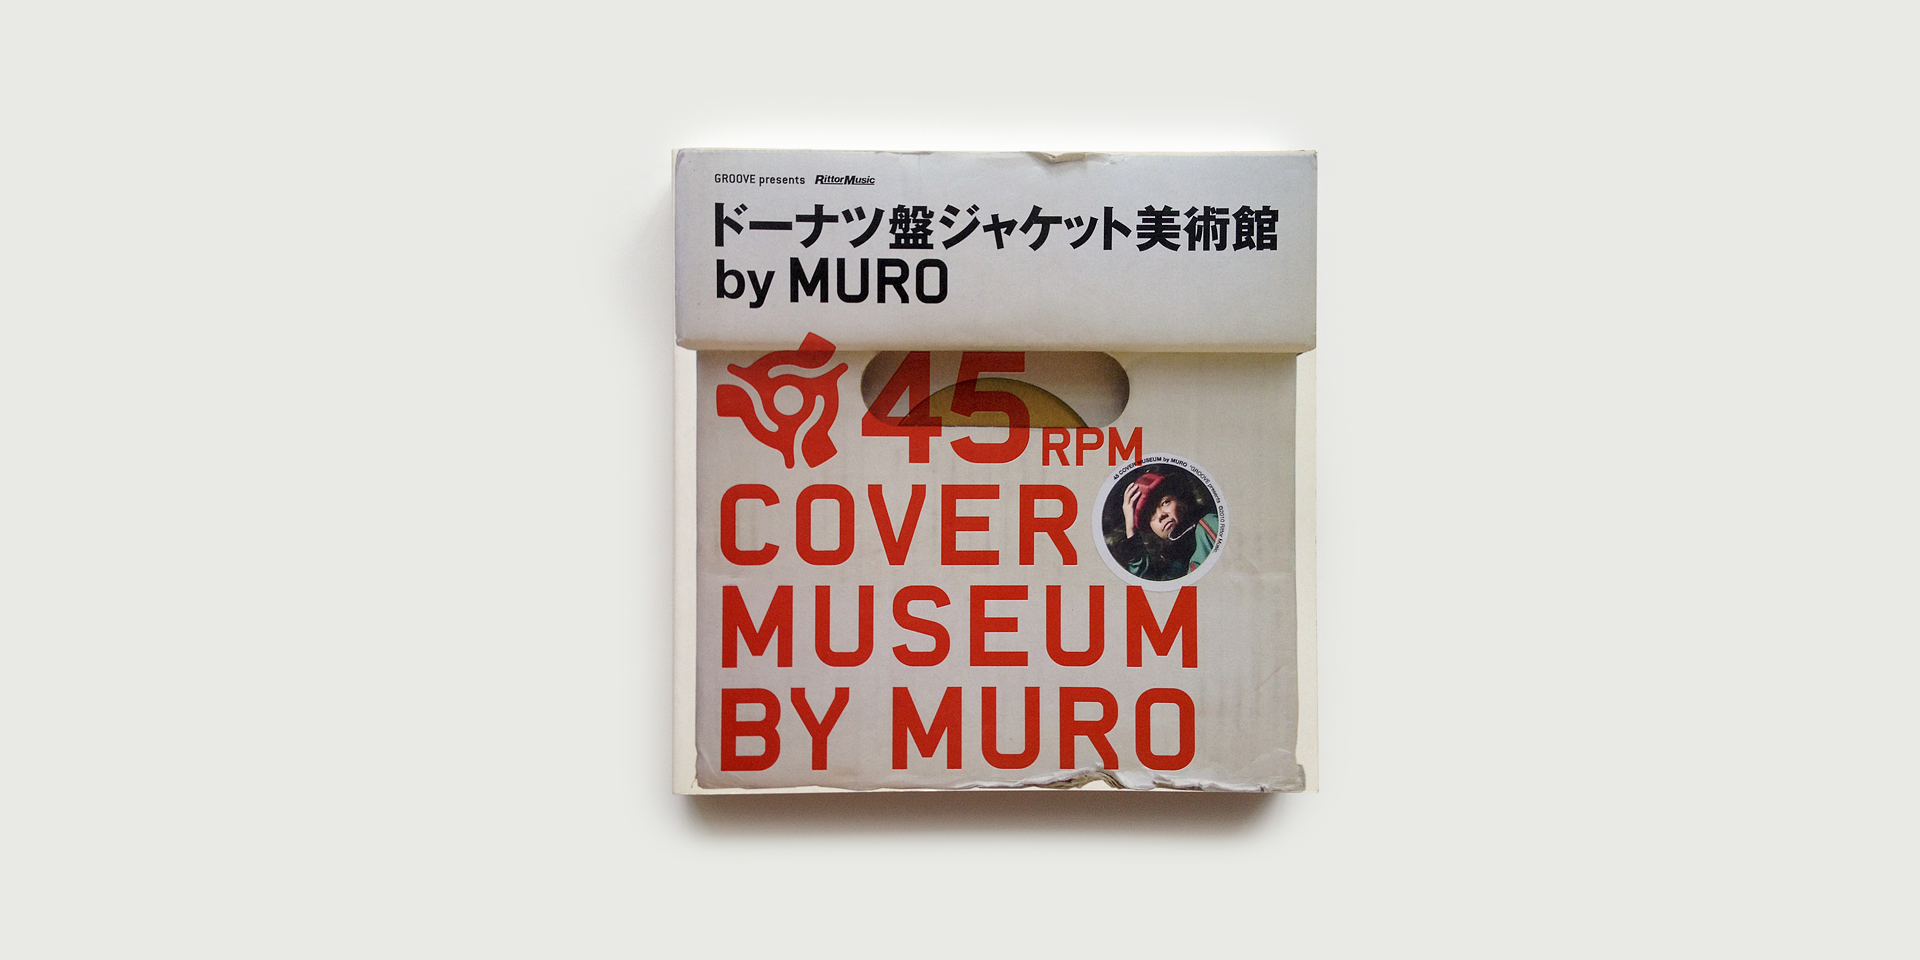 45rpm Cover Museum by MURO